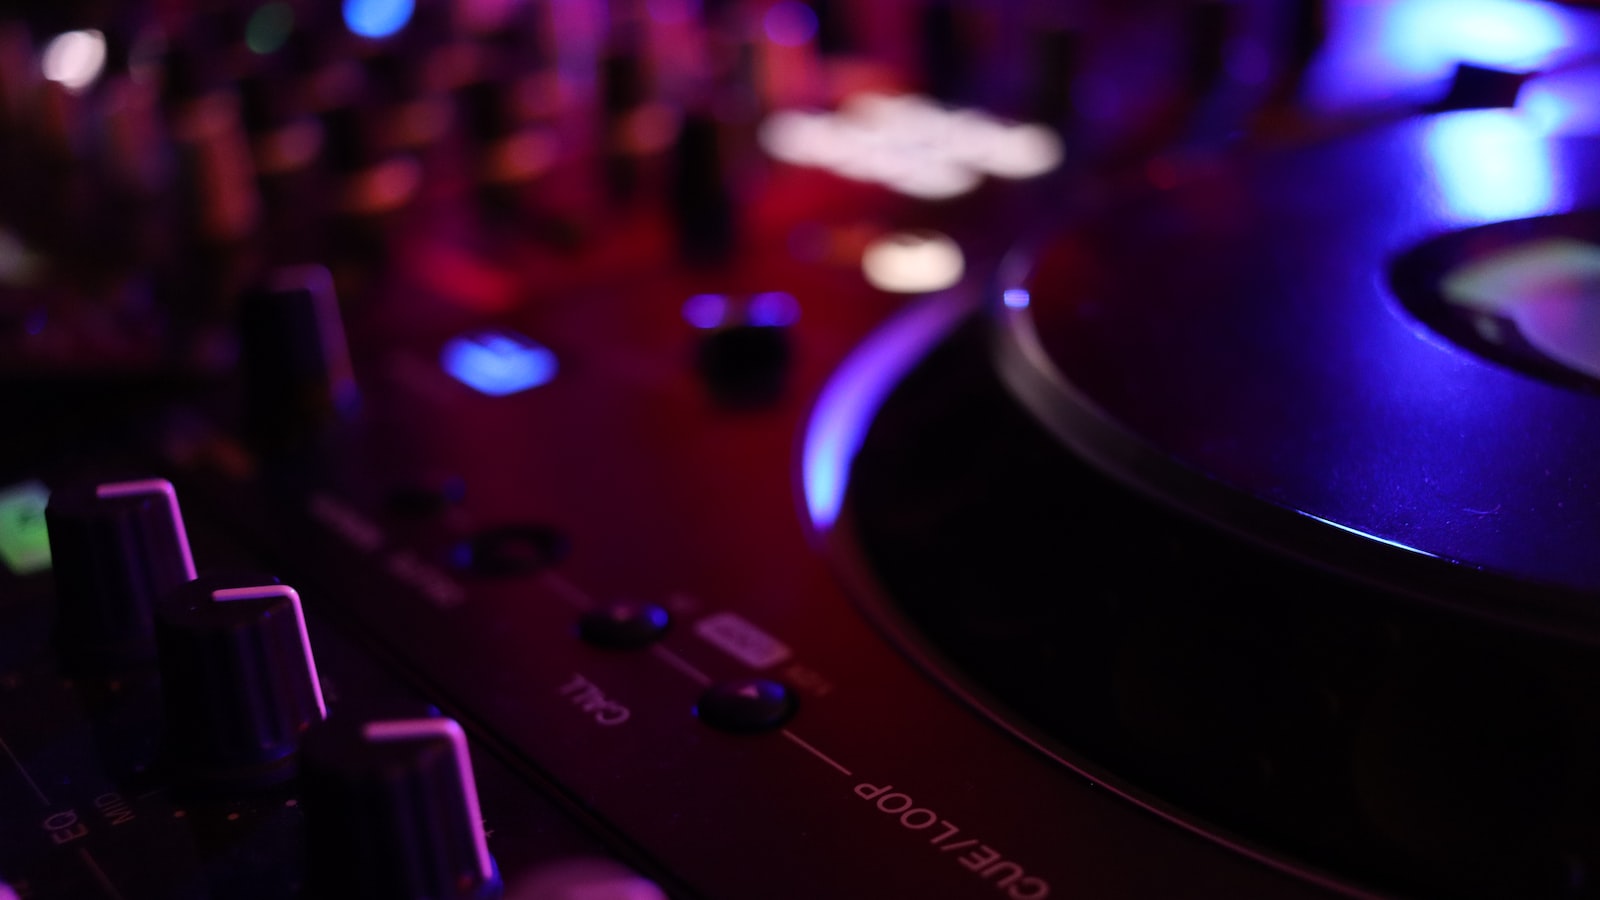 4. Practical Recommendations for Greener DJing